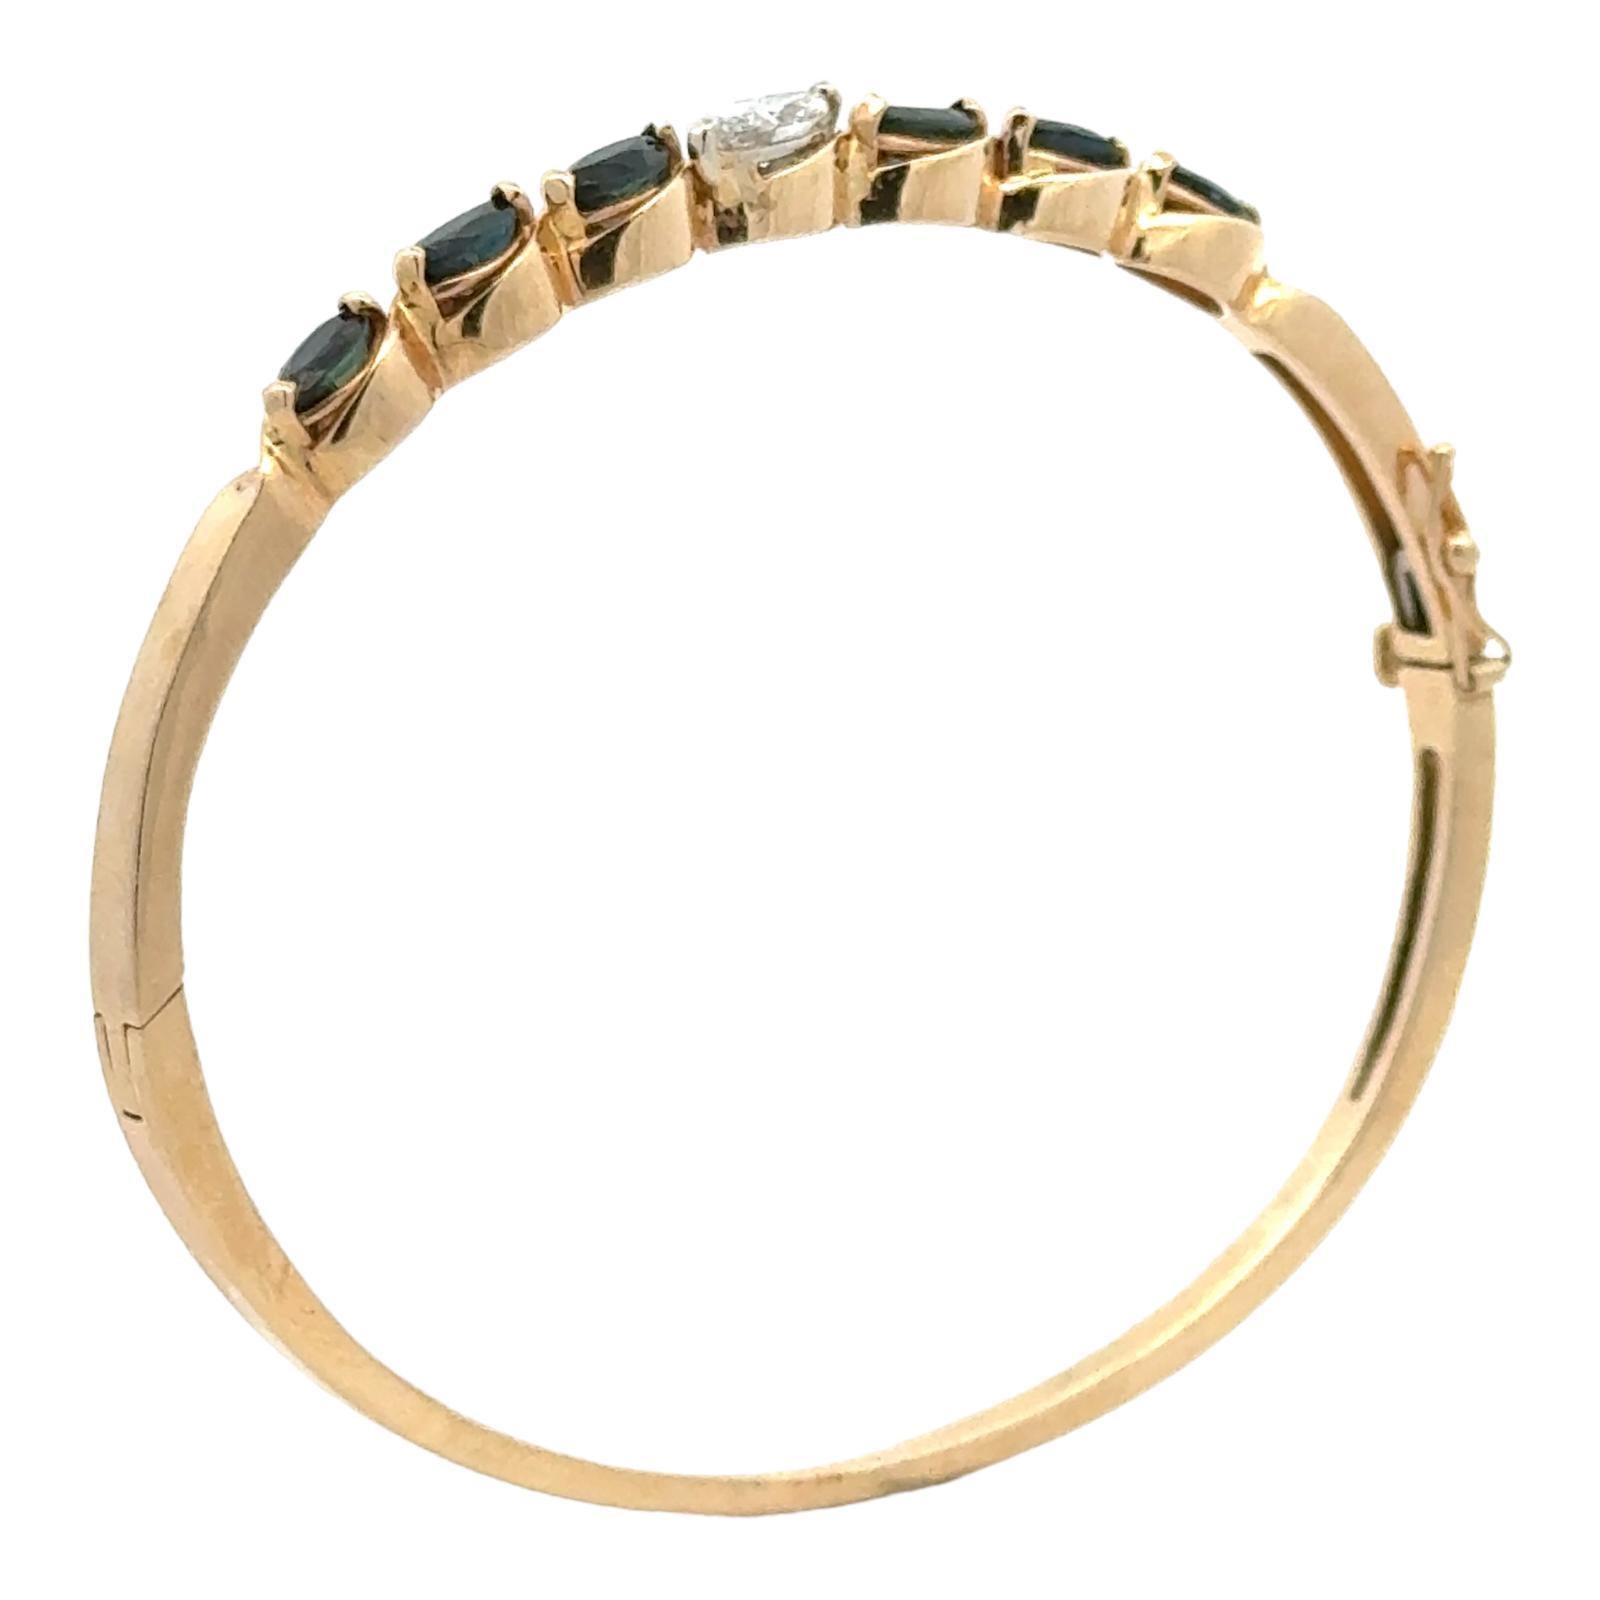 Diamond Sapphire 14 Karat Yellow Gold Hinged Bangle Modern Bracelet In Excellent Condition For Sale In Boca Raton, FL